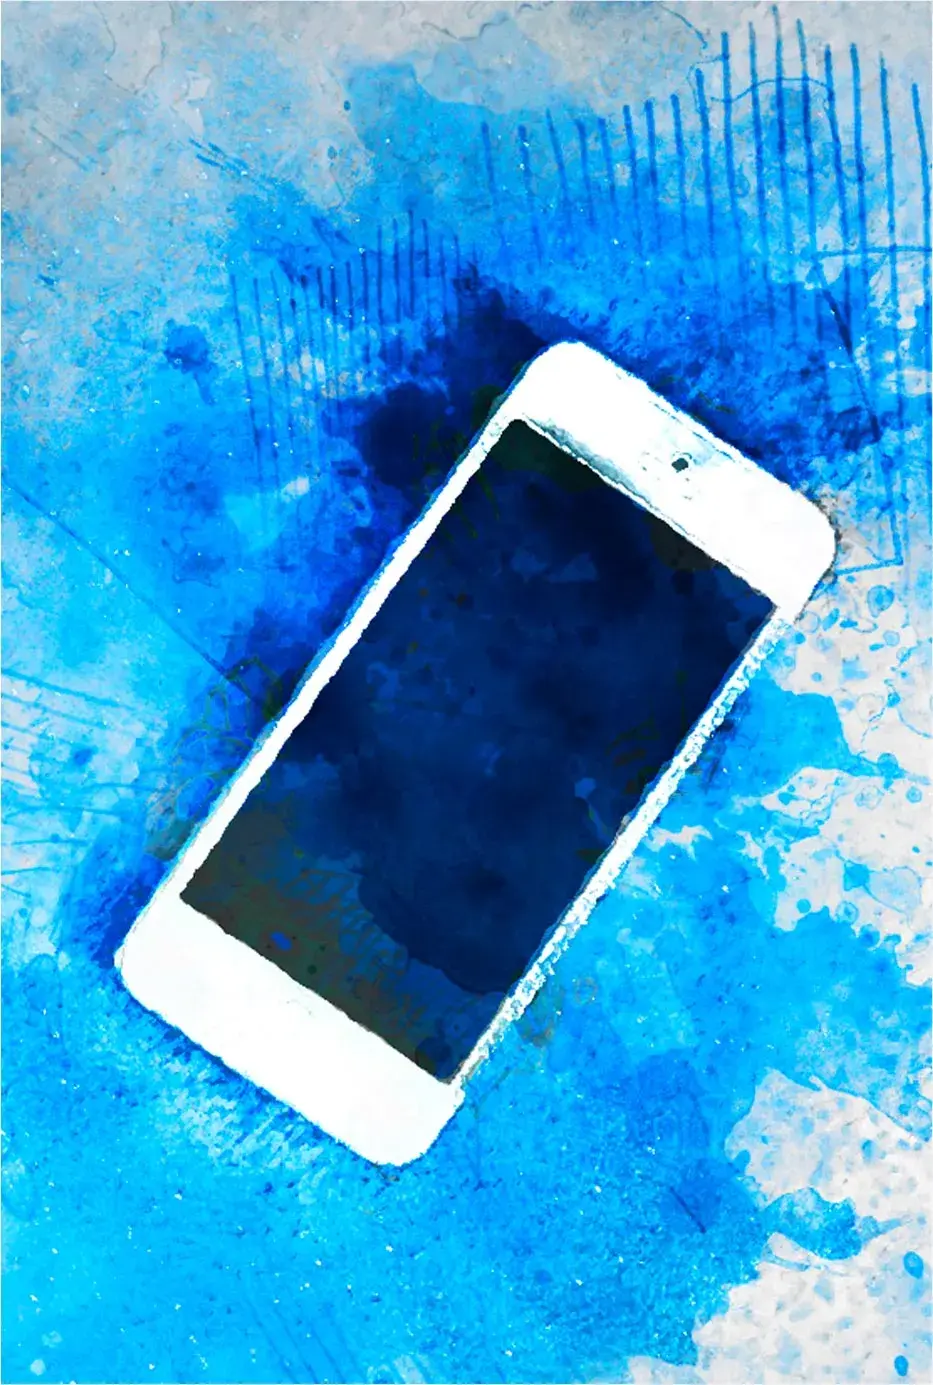 A white Iphone with a black screen with a abstract blue splash behind it.